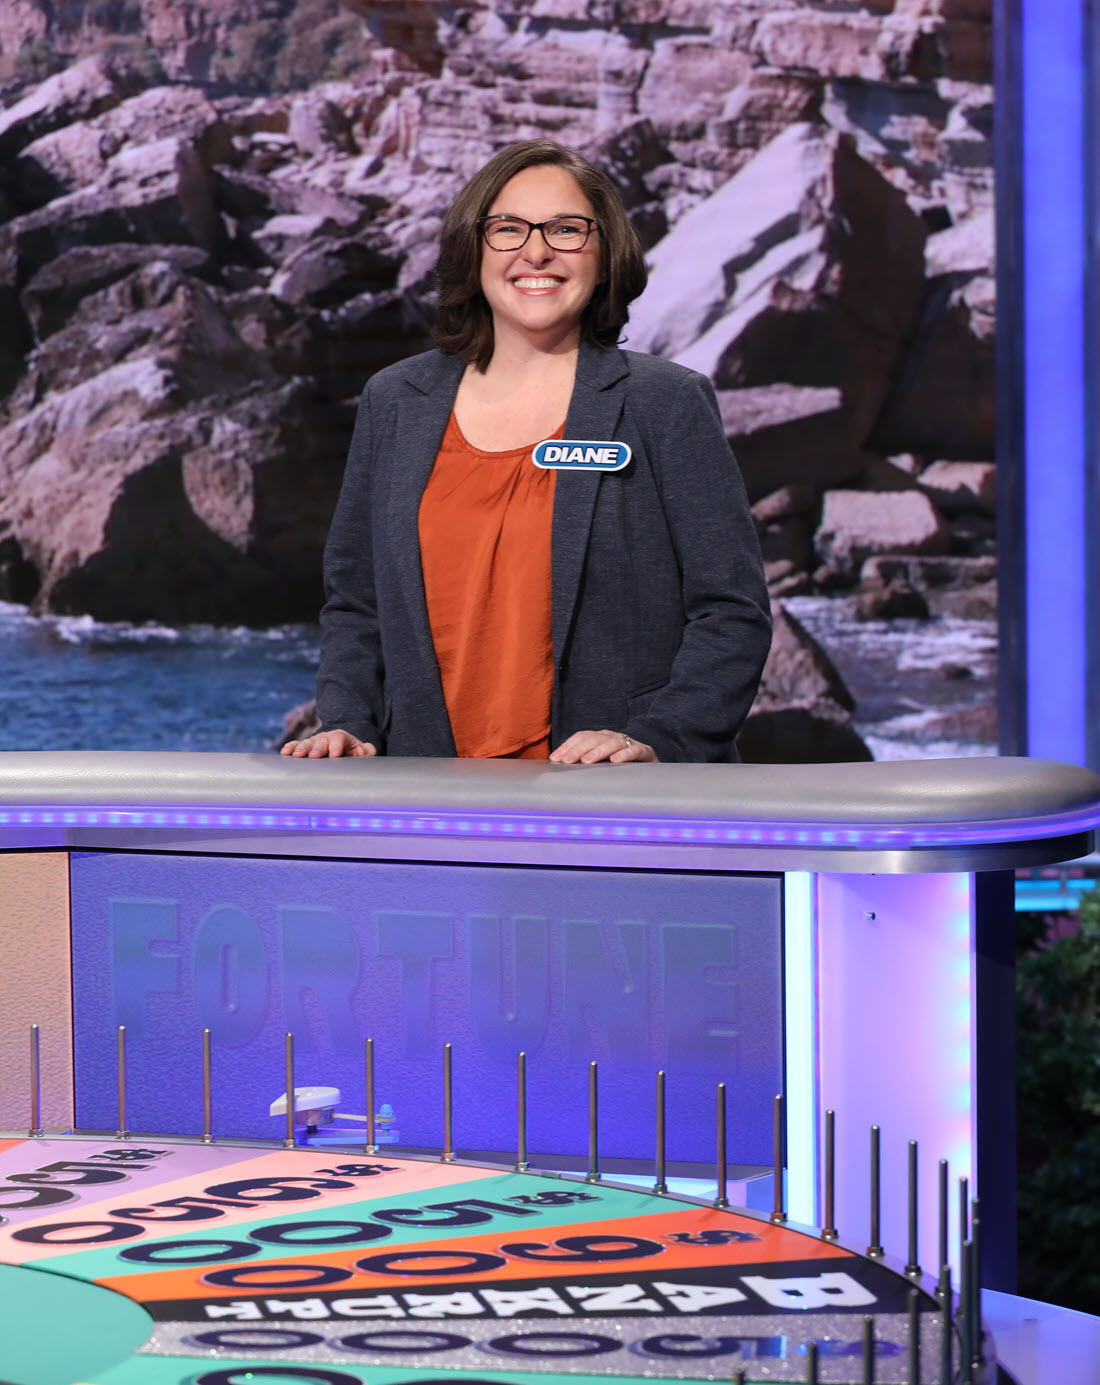 Diane Leipzig, Canterbury Woods ES principal, as a contestant on Wheel of Fortune.